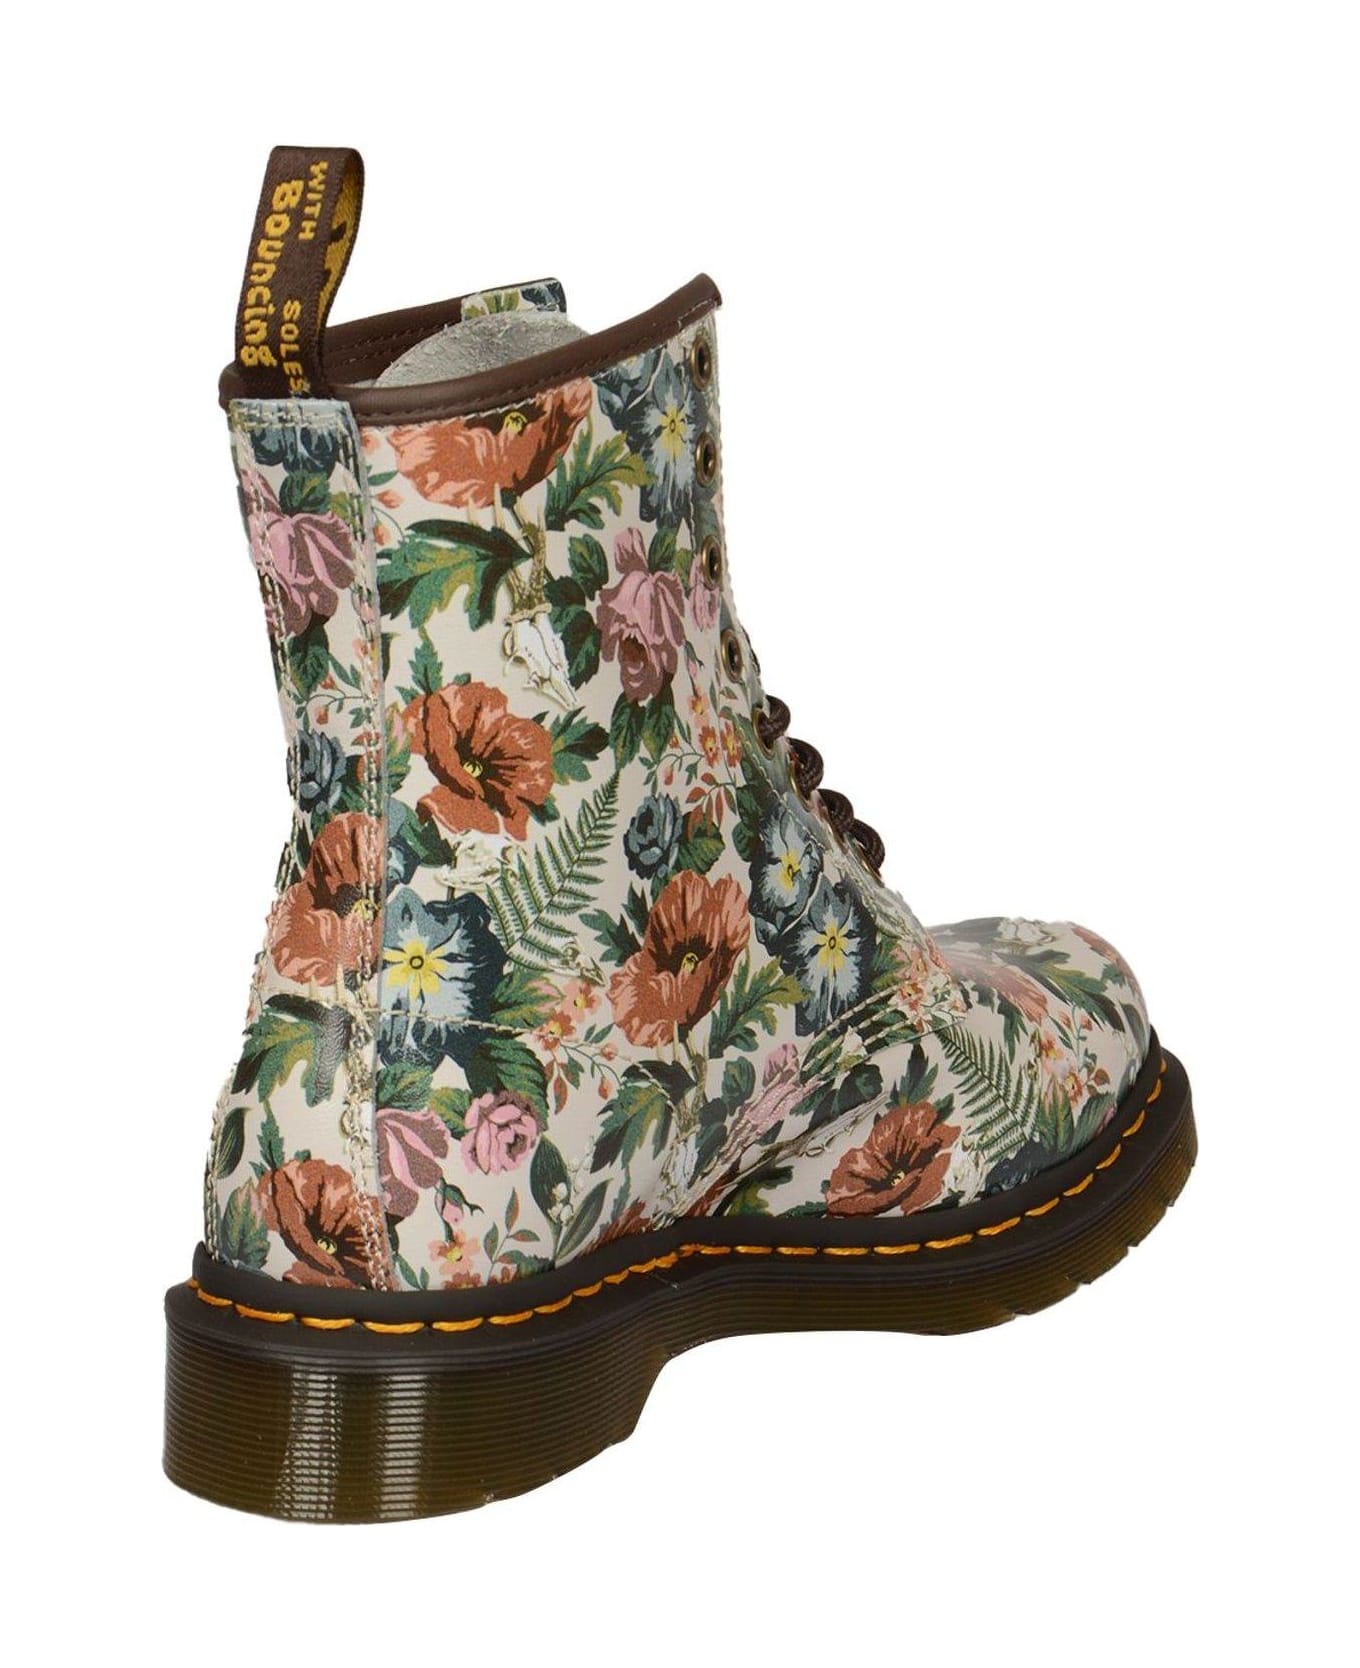 Dr. Martens 1460 All-over Printed Lace-up Boots - MultiColour シューズ